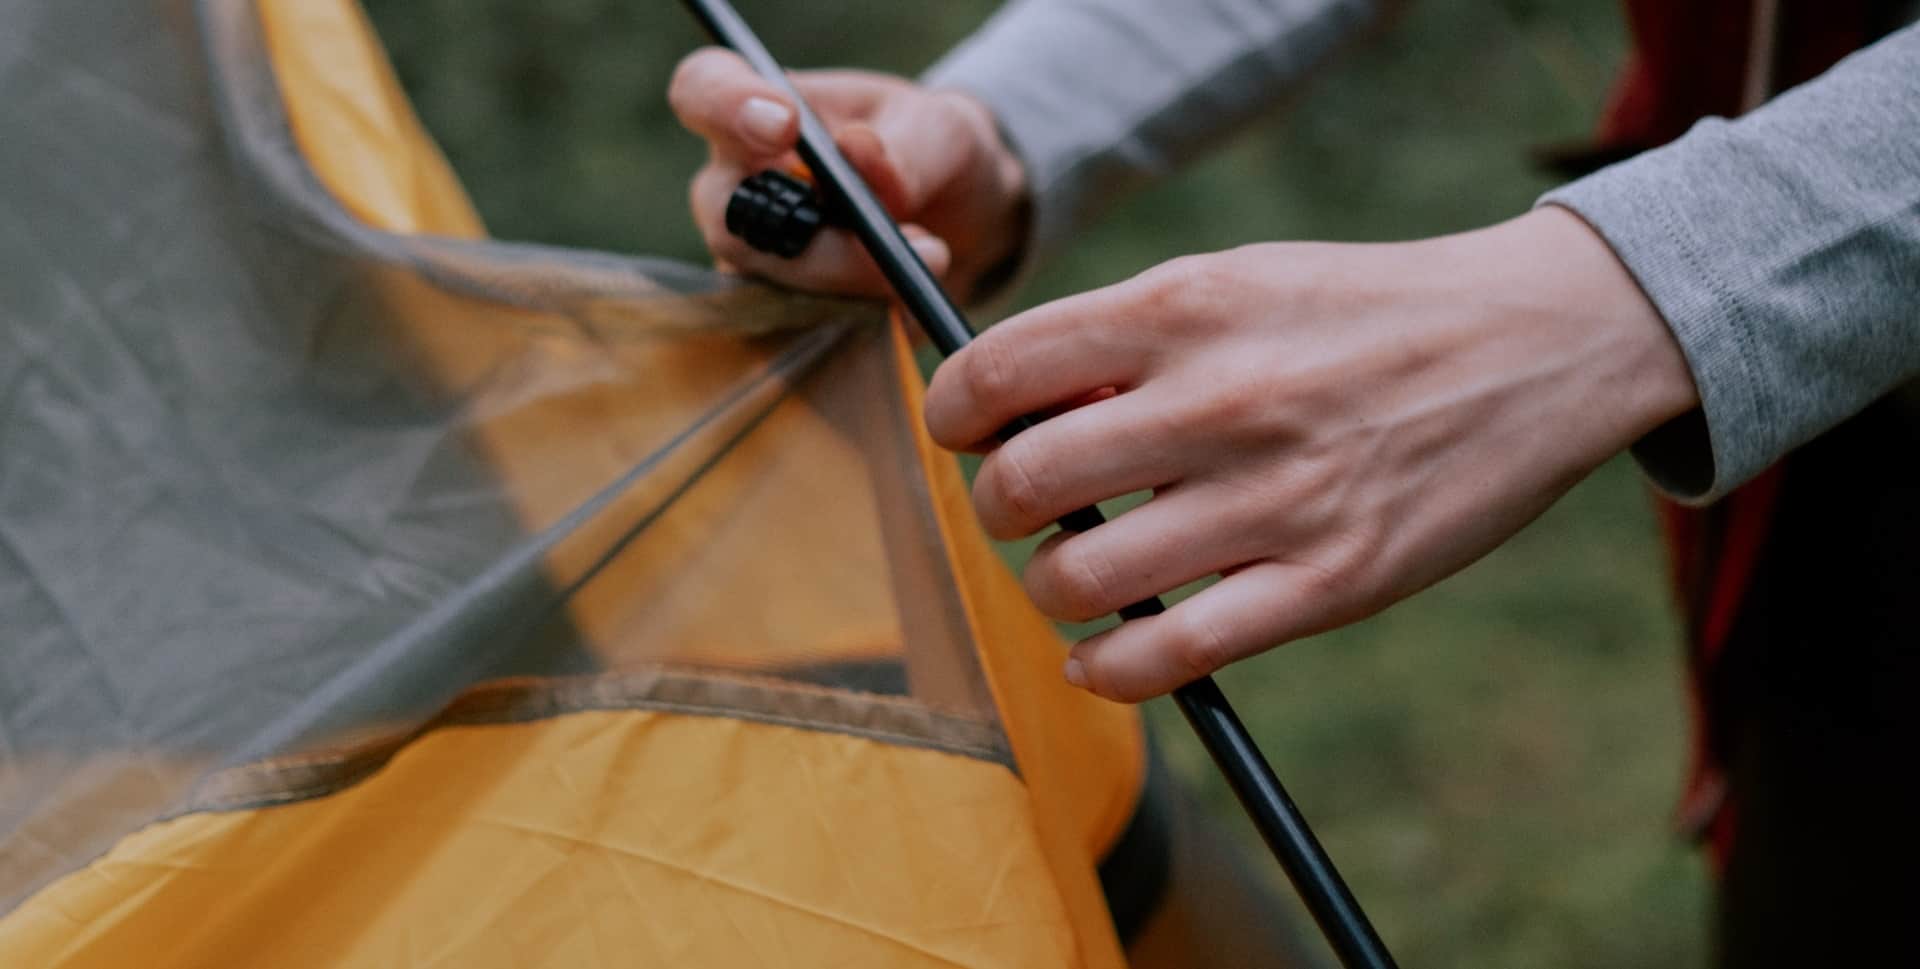 Person’s hands clipping a tent inner to a pole